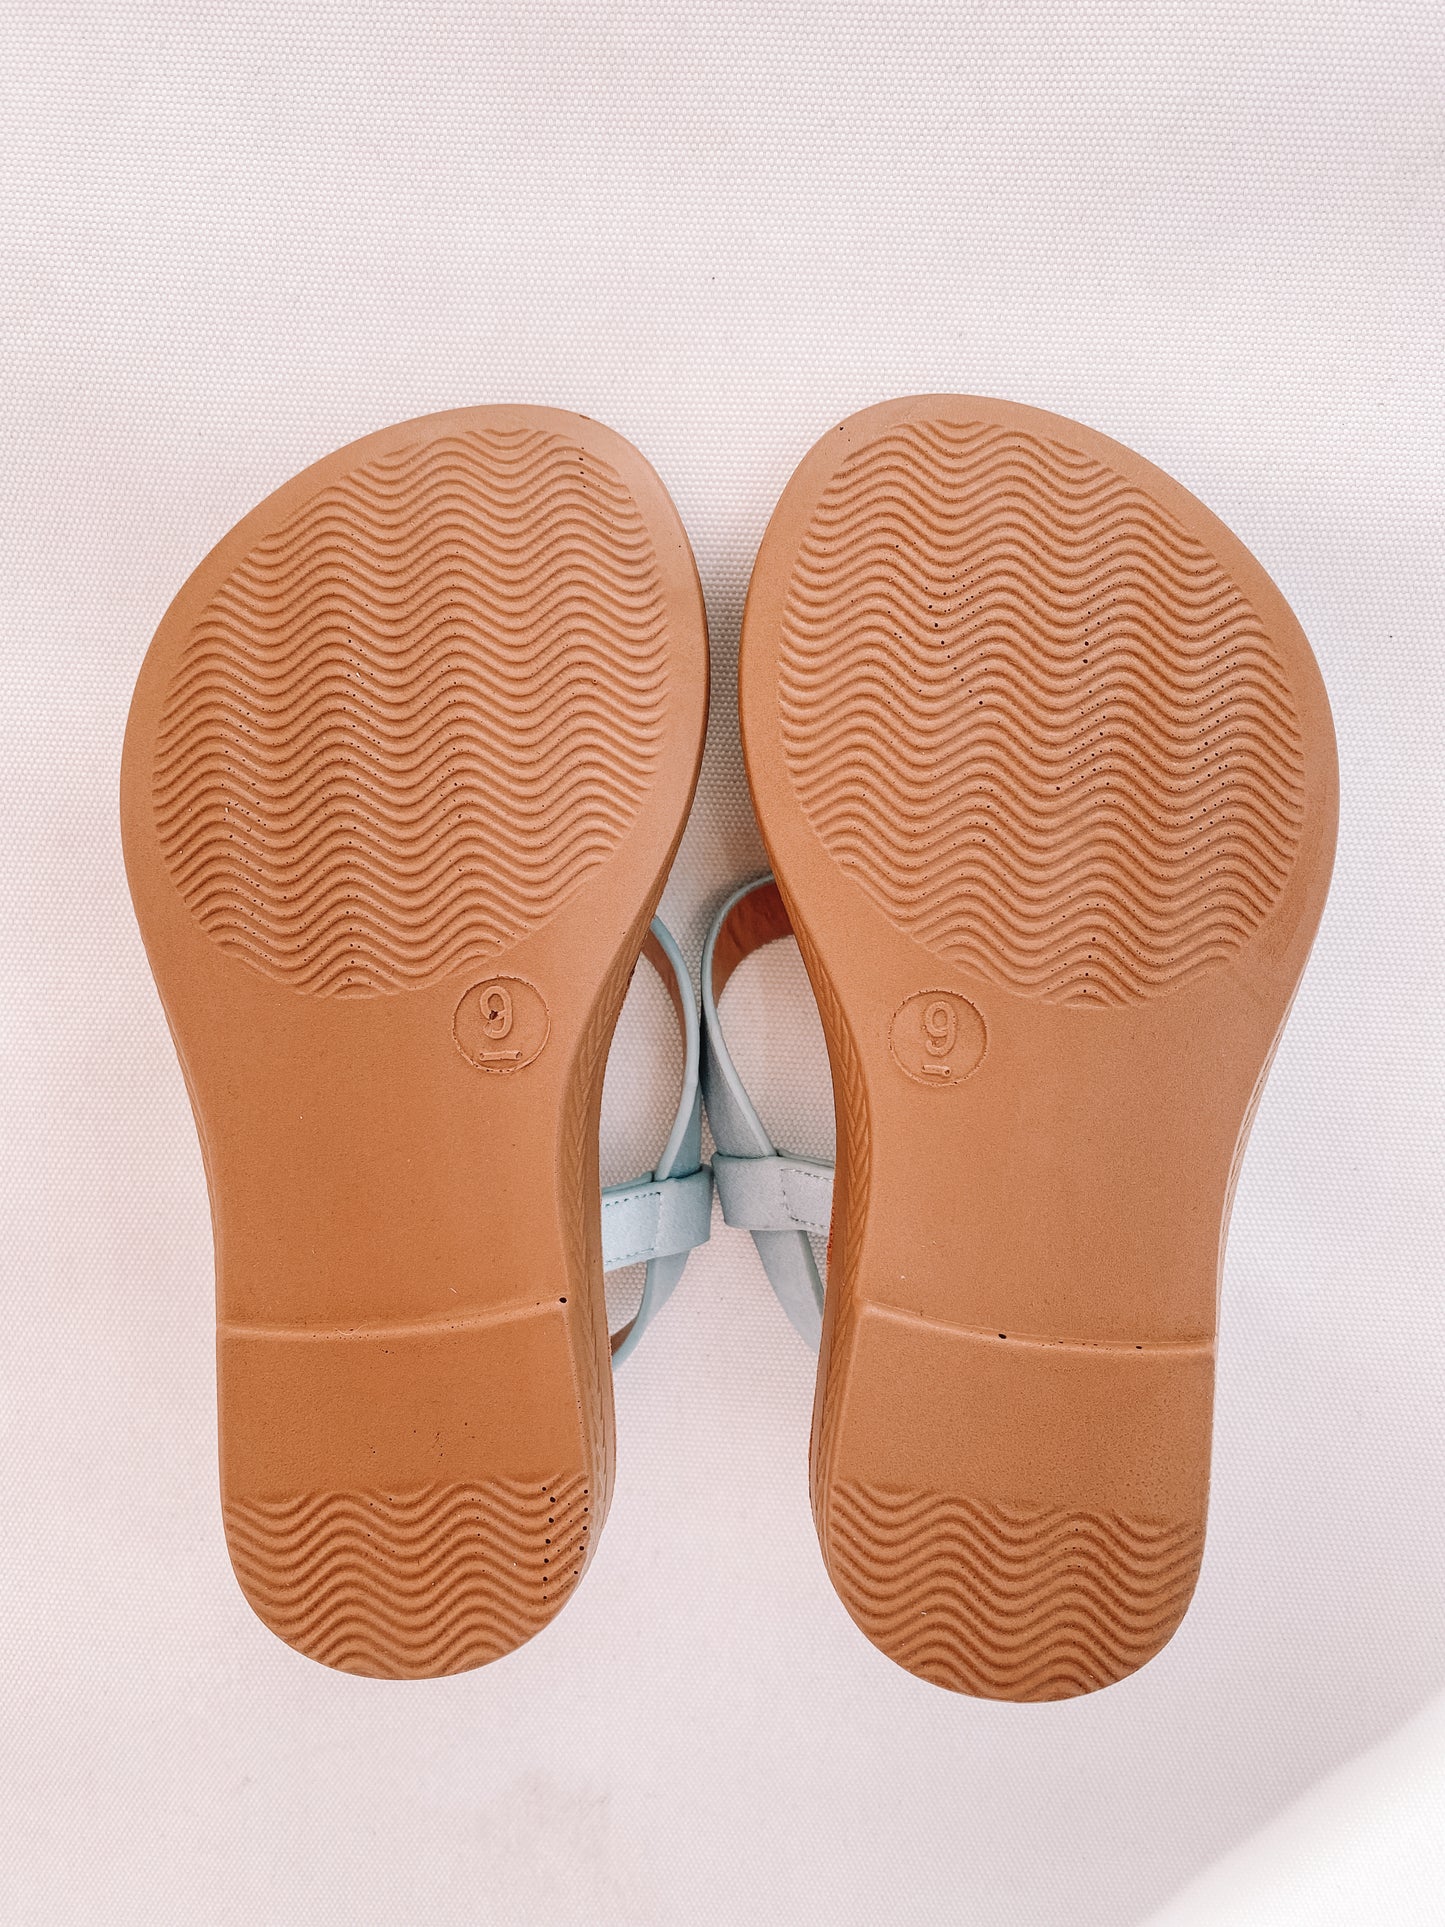 Displaying kids sandal bottom of the sole 